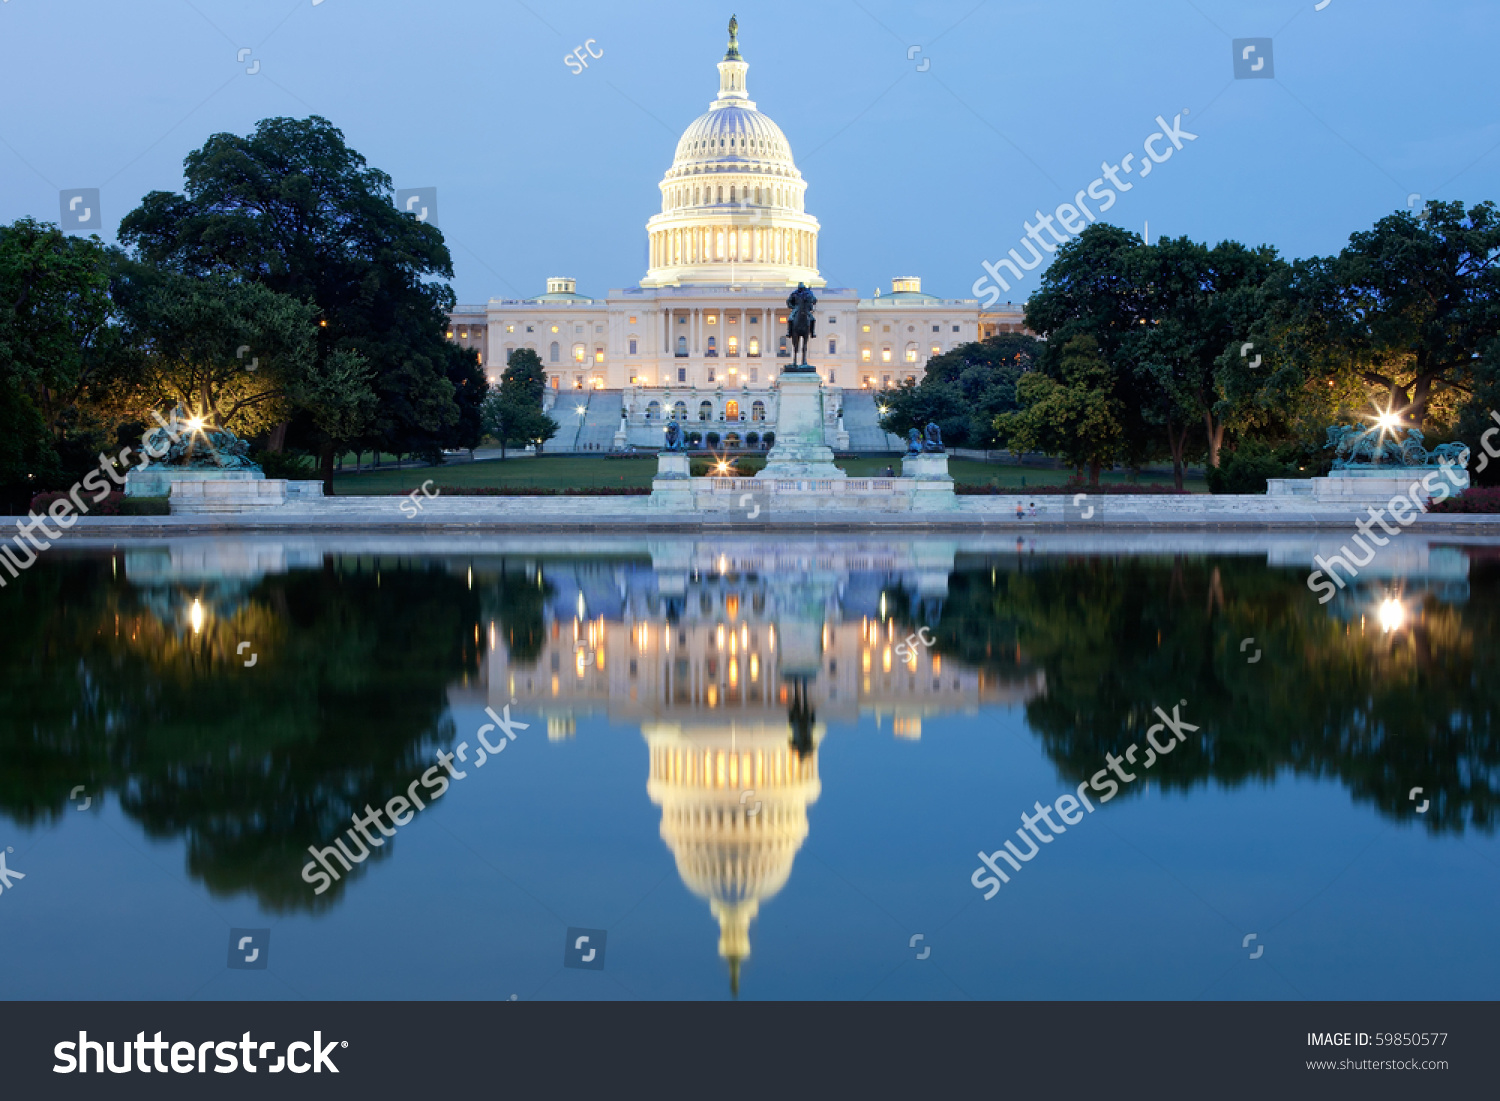 The United States Capitol building in Washington DC, USA - after dark with water reflection #59850577